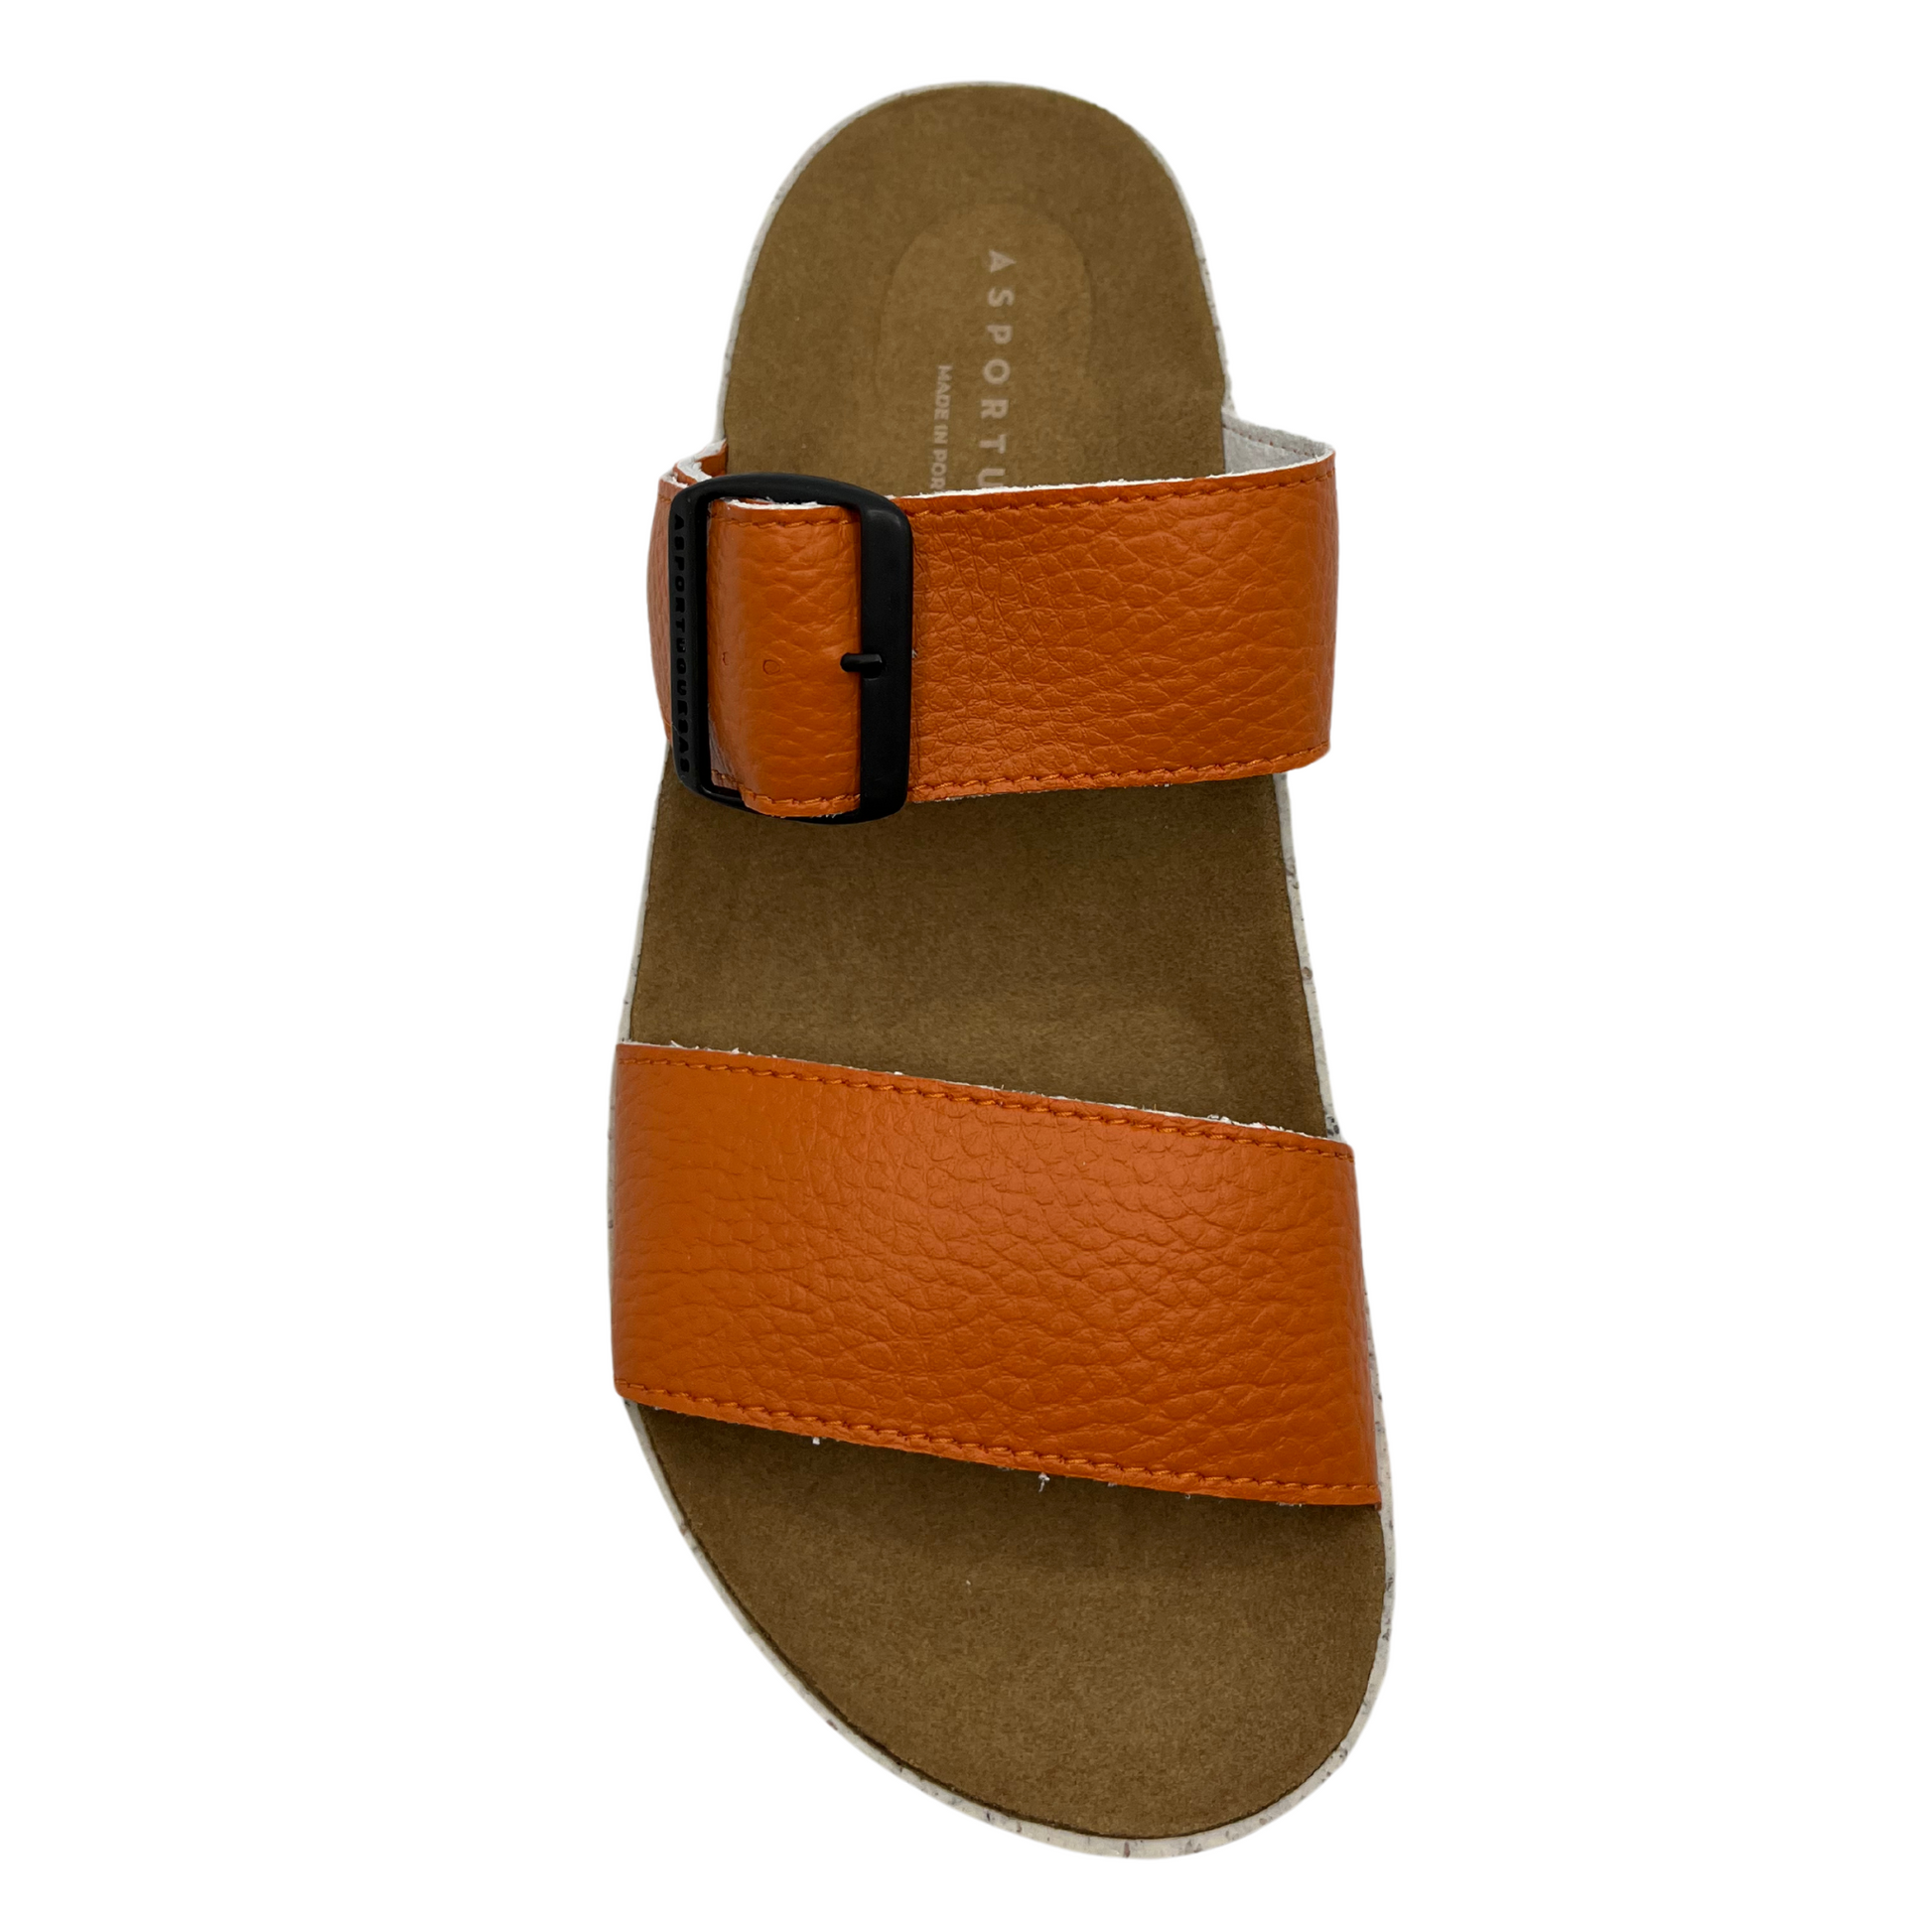 Top view of orange strapped sandal with contoured footbed and speckled white and brown outsole